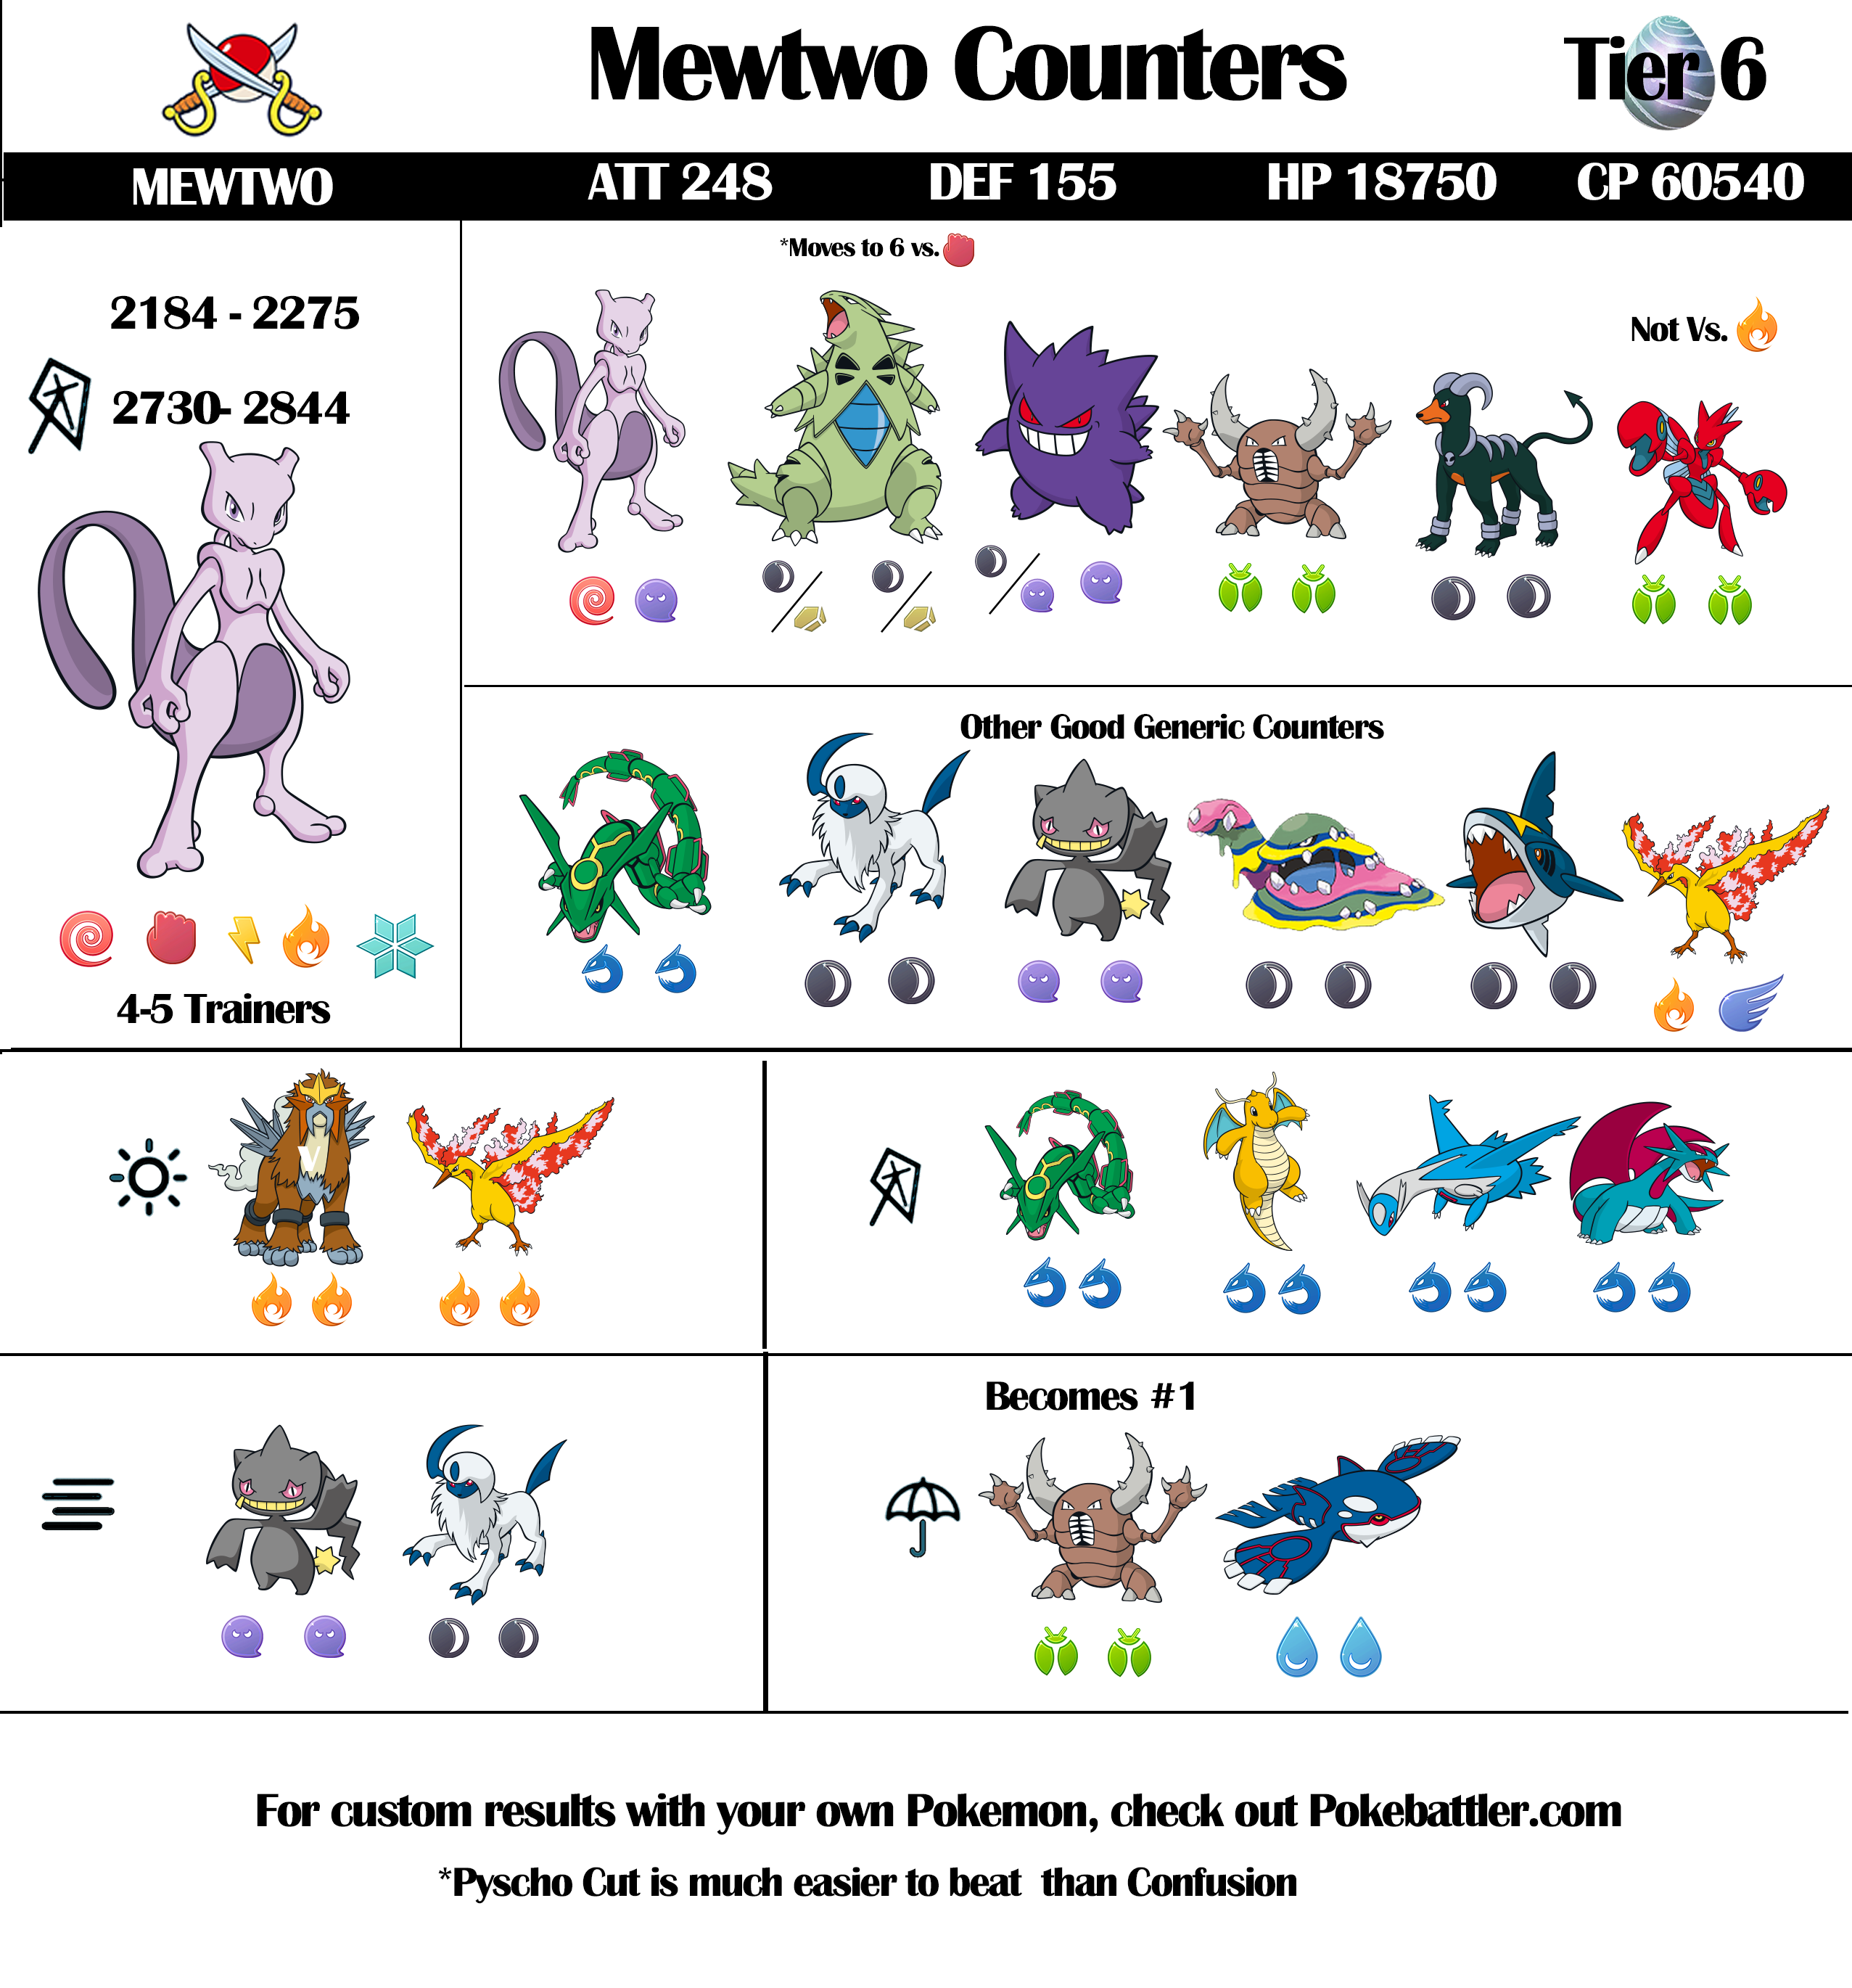 Tier 6 Mewtwo Counters and Raid Guide 